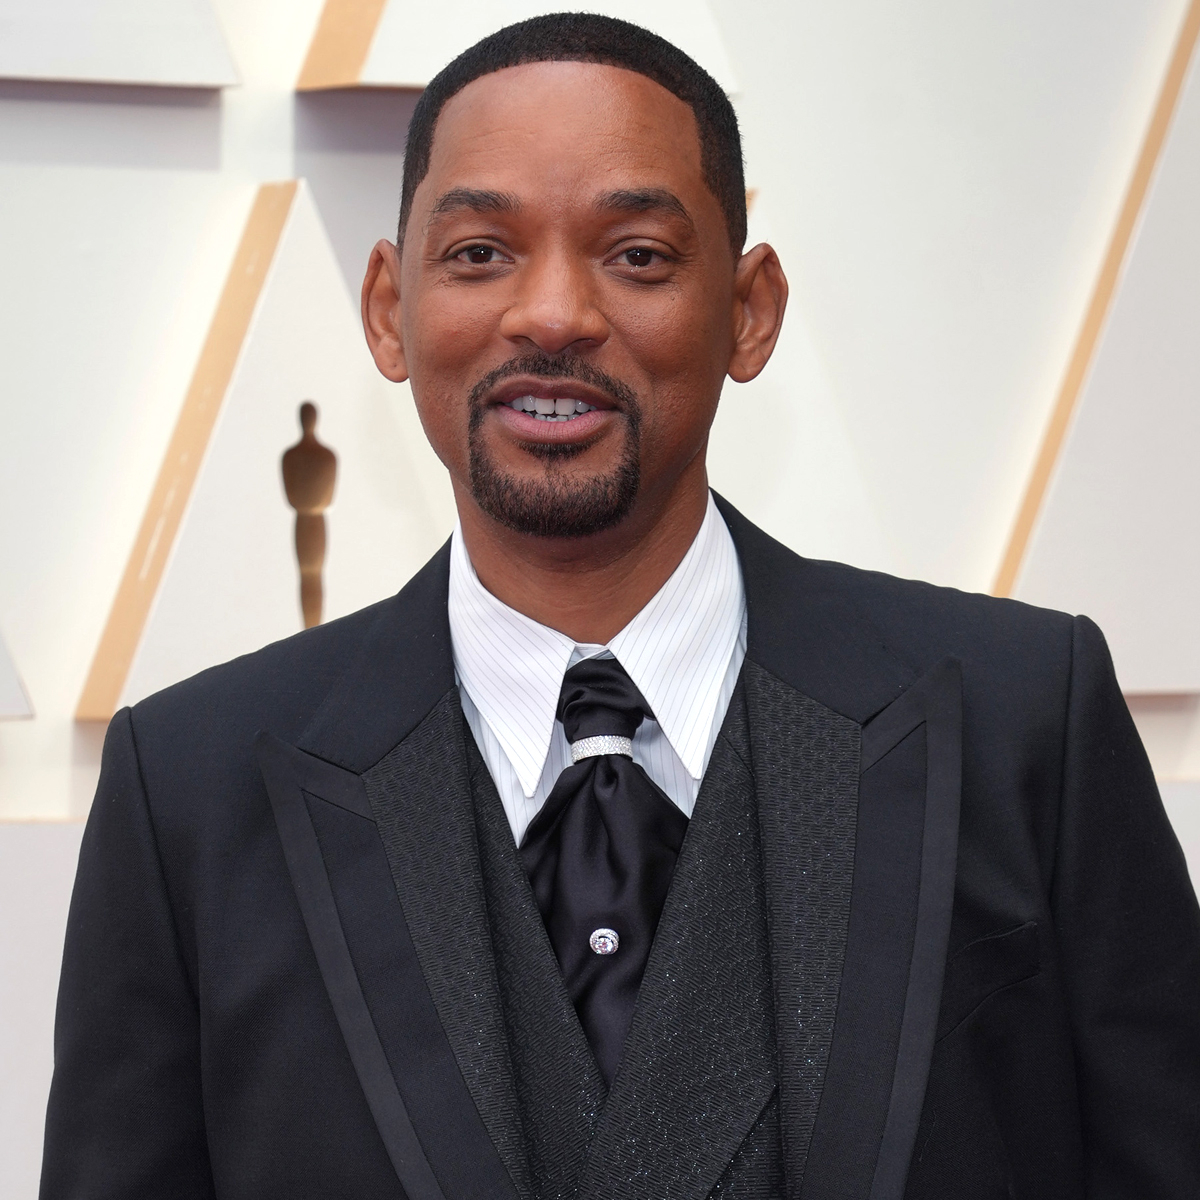 Will Smith Teases His Return To Social Media After Oscars Slap